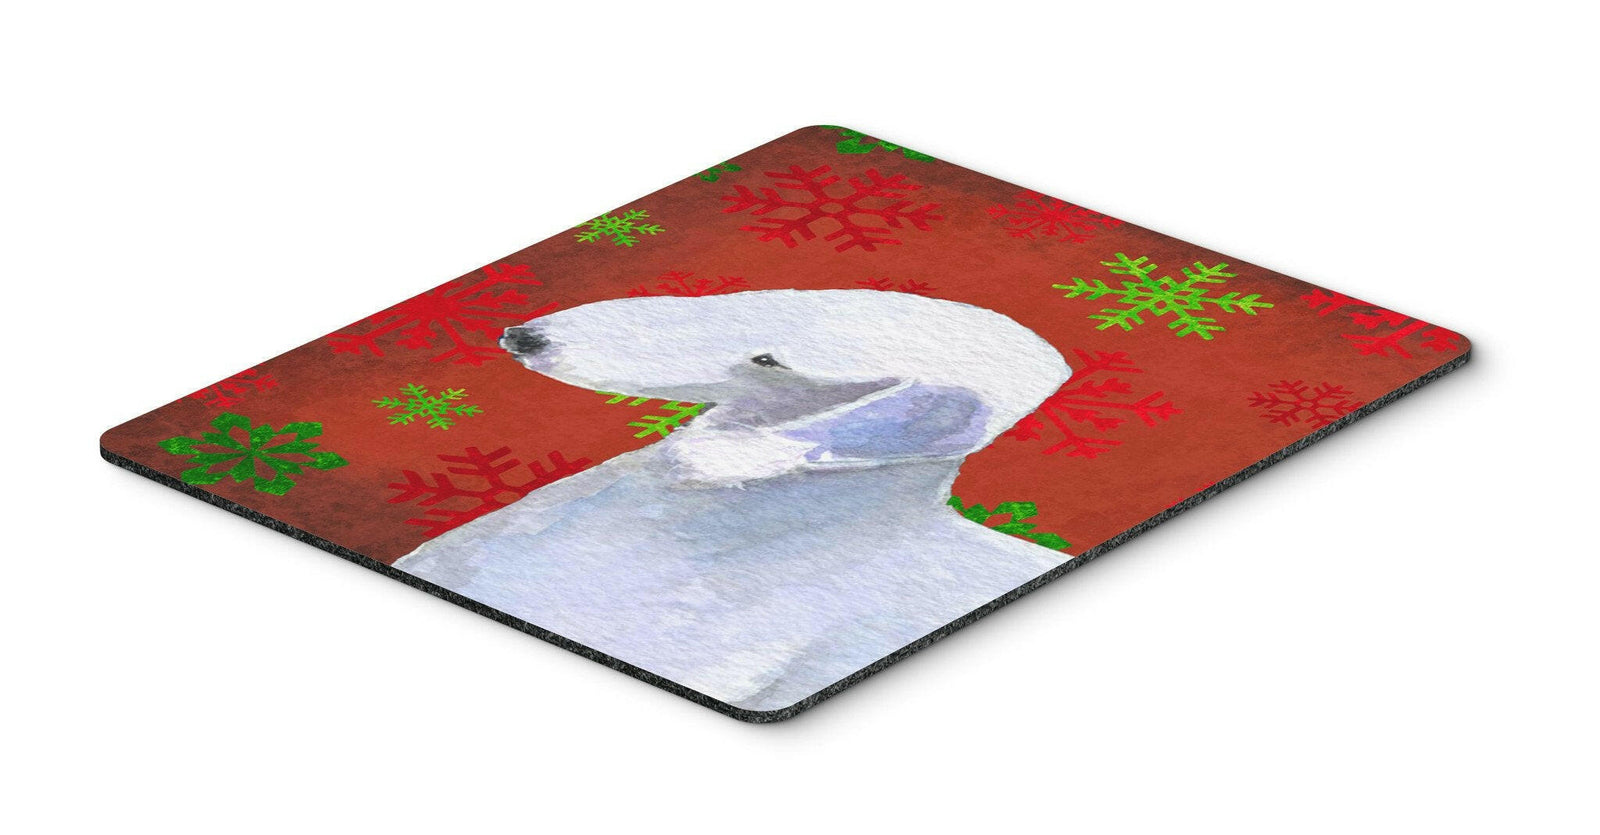 Bedlington Terrier Red Green Snowflakes Christmas Mouse Pad, Hot Pad or Trivet by Caroline's Treasures